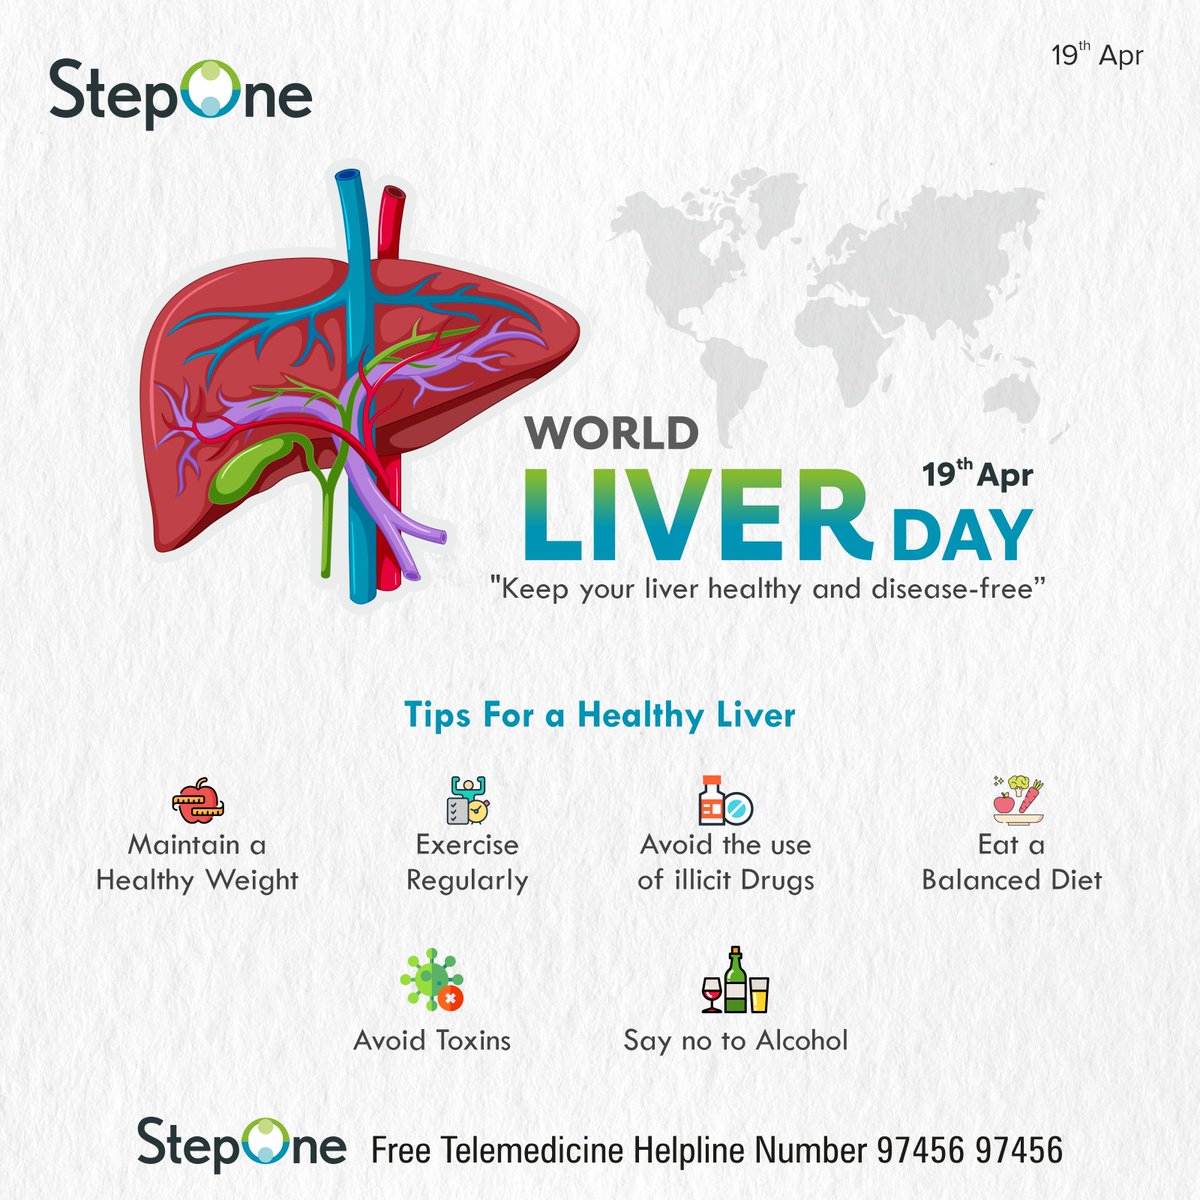 Happy World Liver Day! May this day serve as a reminder to cherish and care for our livers, the unsung heroes of our bodies. Here's to a healthy liver and a vibrant life! 

#StepOne #WorldLiverDay #LiverHealth #HealthyLiver #LiverAwareness #LoveYourLiver #LiverCare #LiverDisease